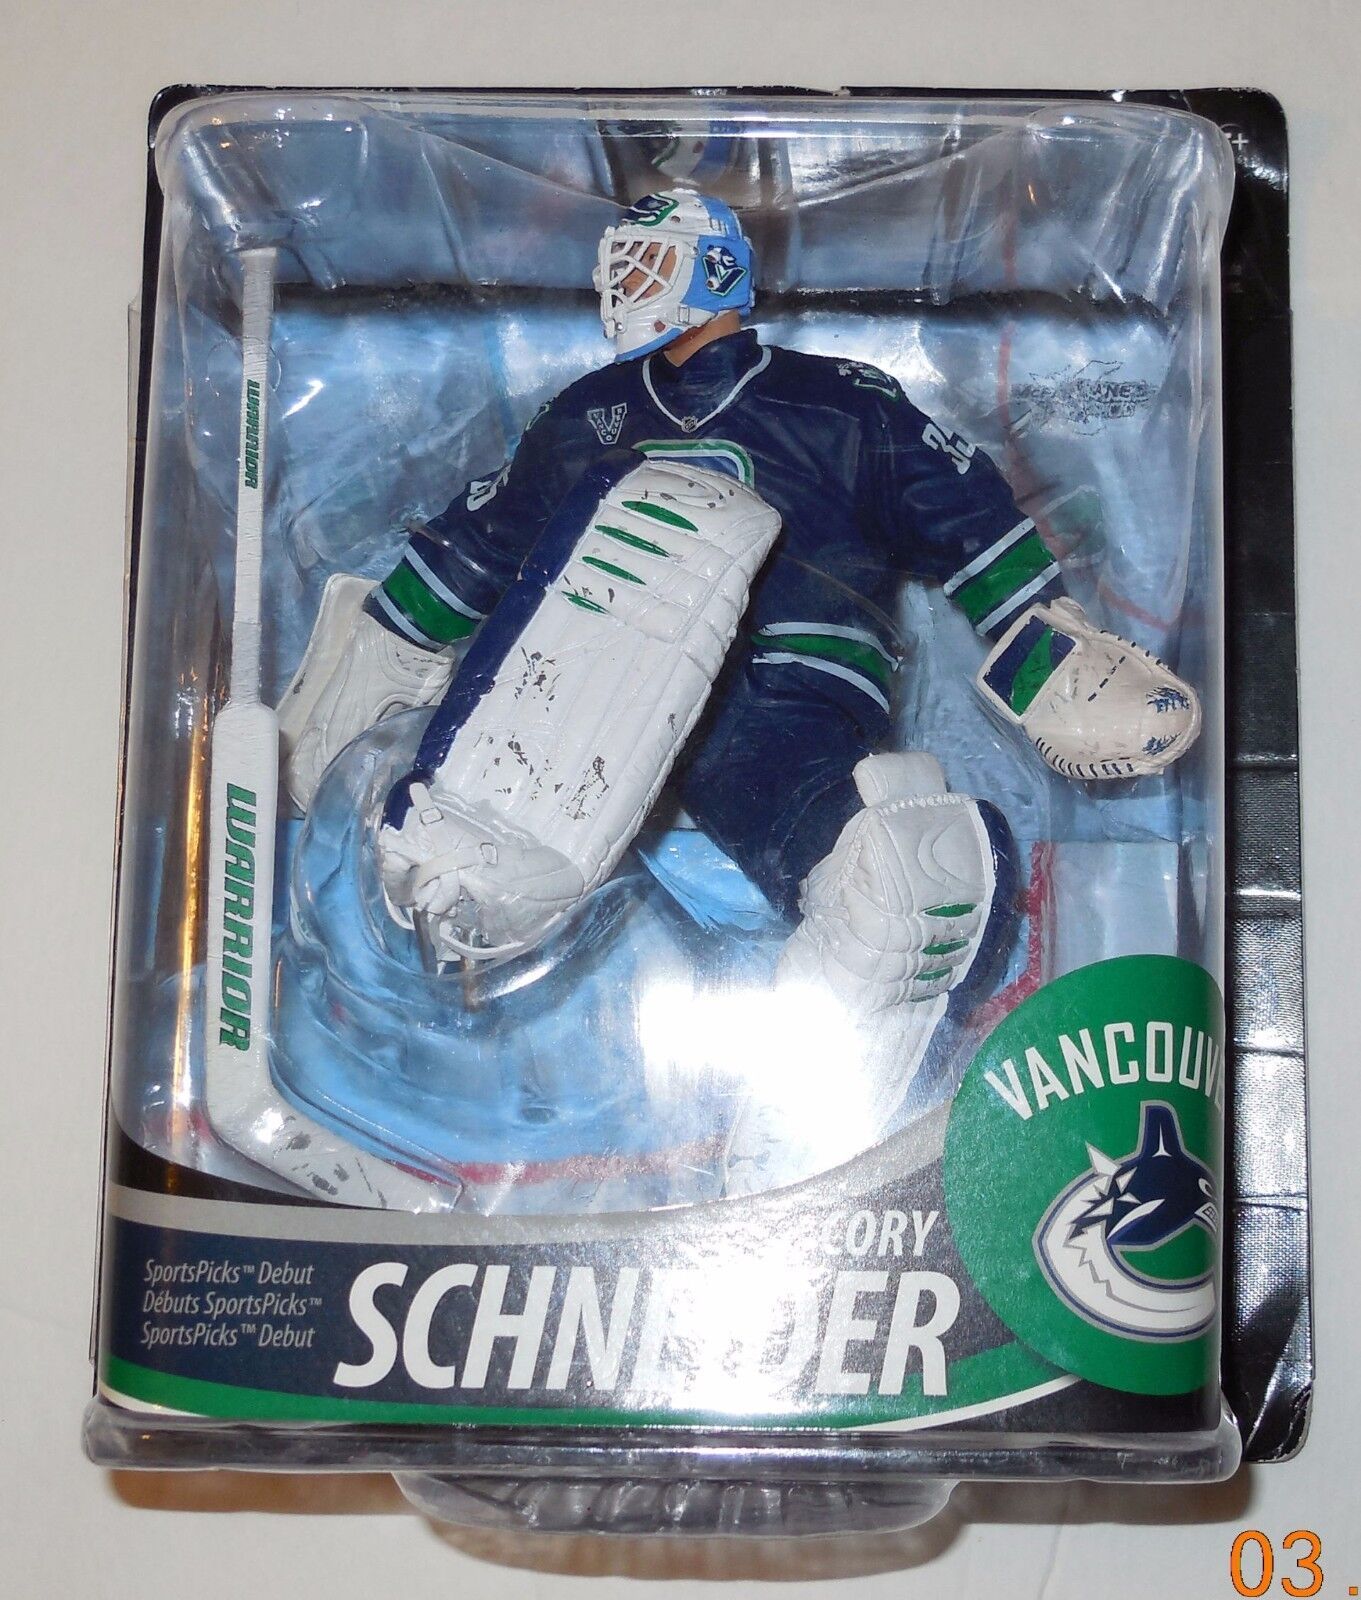 Primary image for Mcfarlane NHL Series 33 Cory schneider 3rd Jersey CL Variant Action Figure VHTF